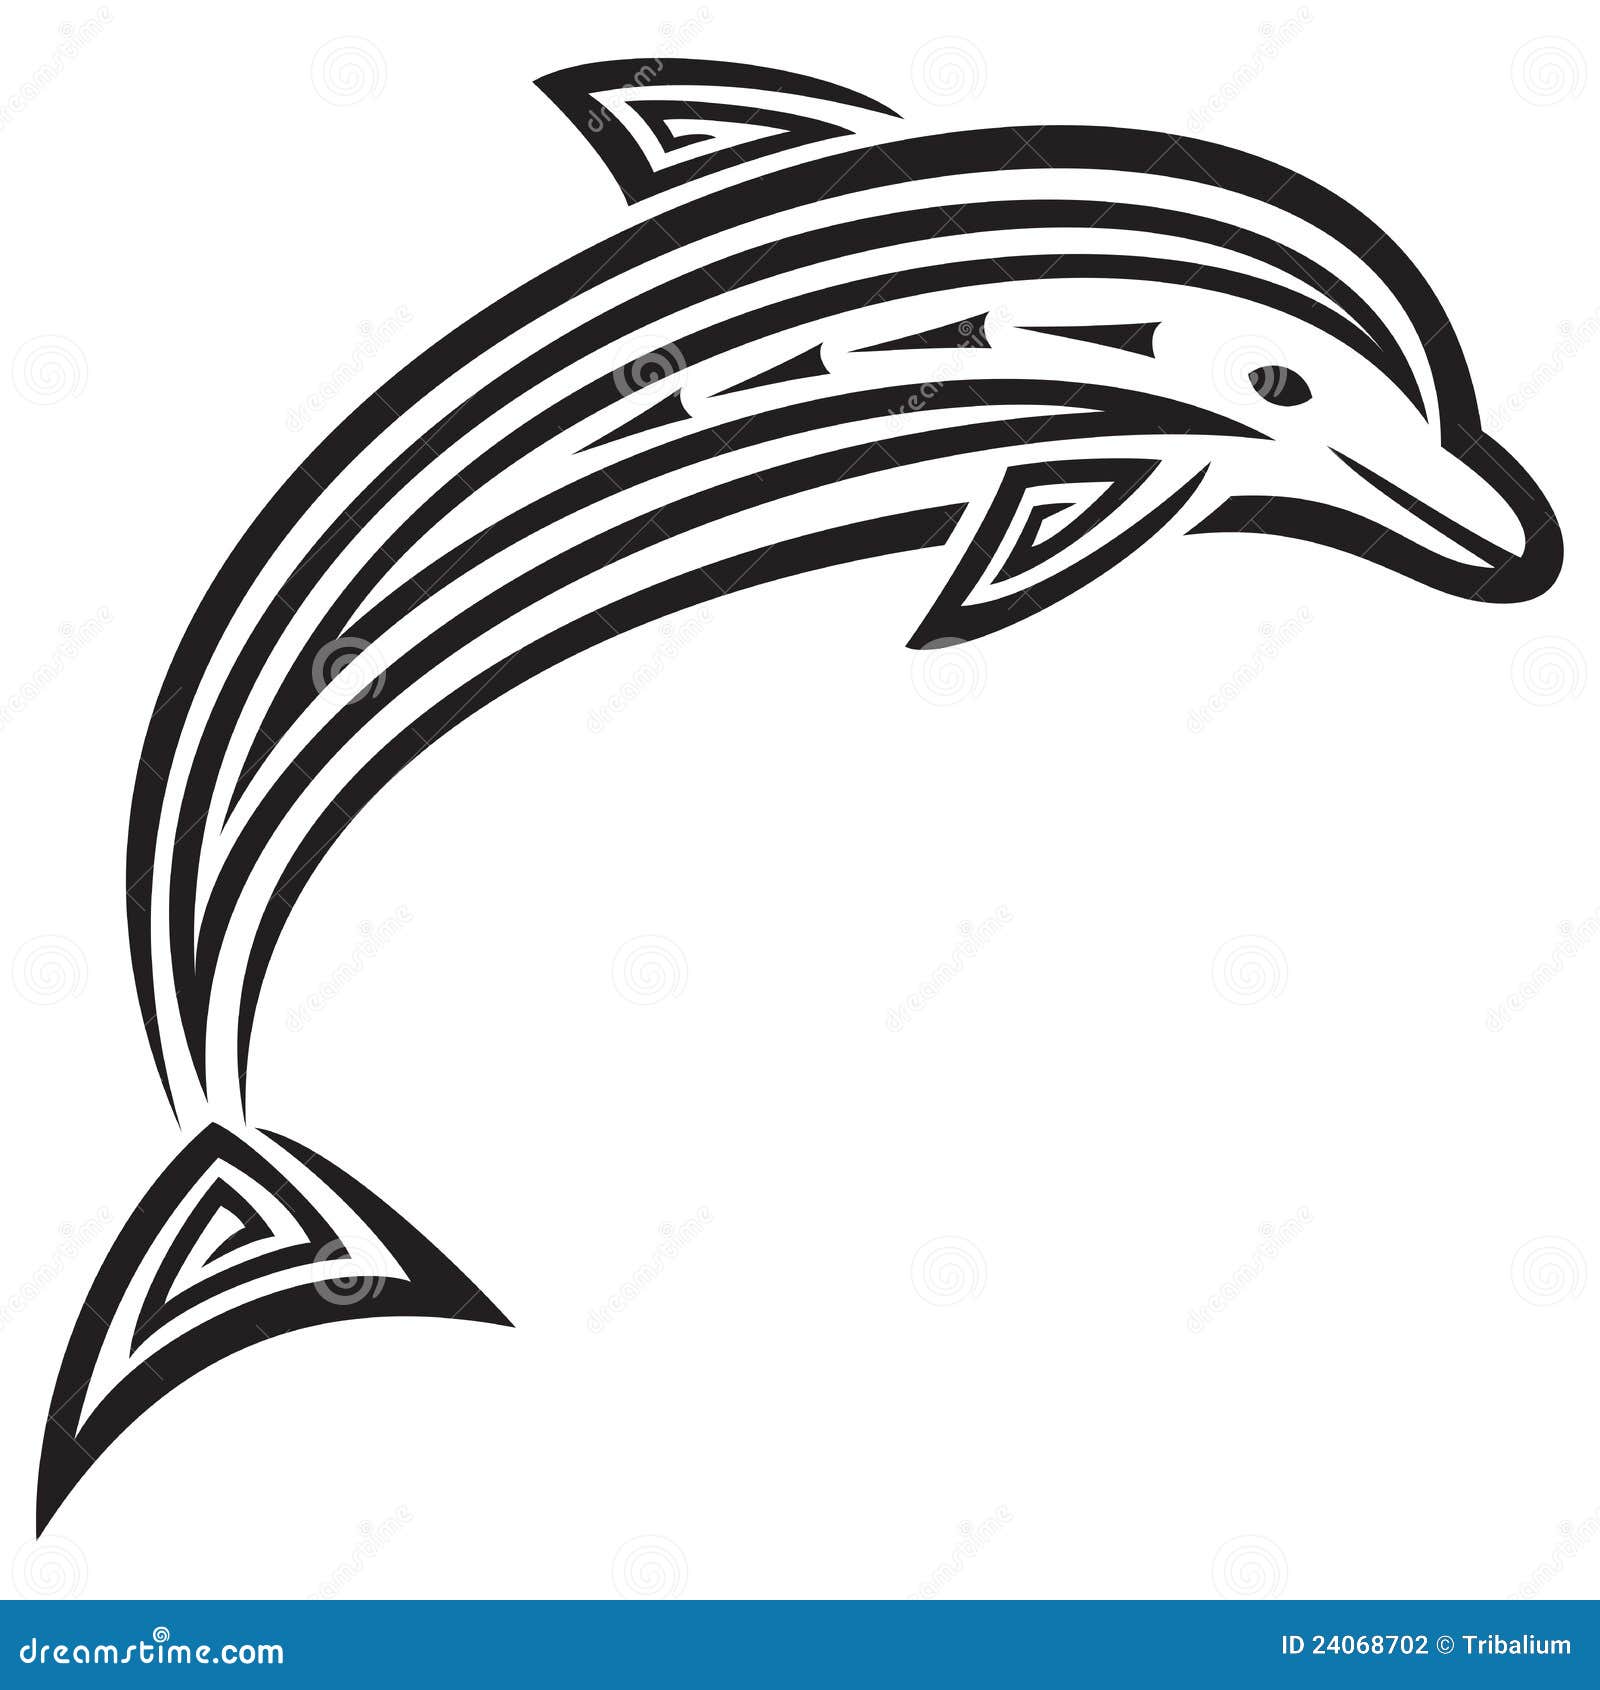 Dolphin Tribal Merch & Gifts for Sale | Redbubble